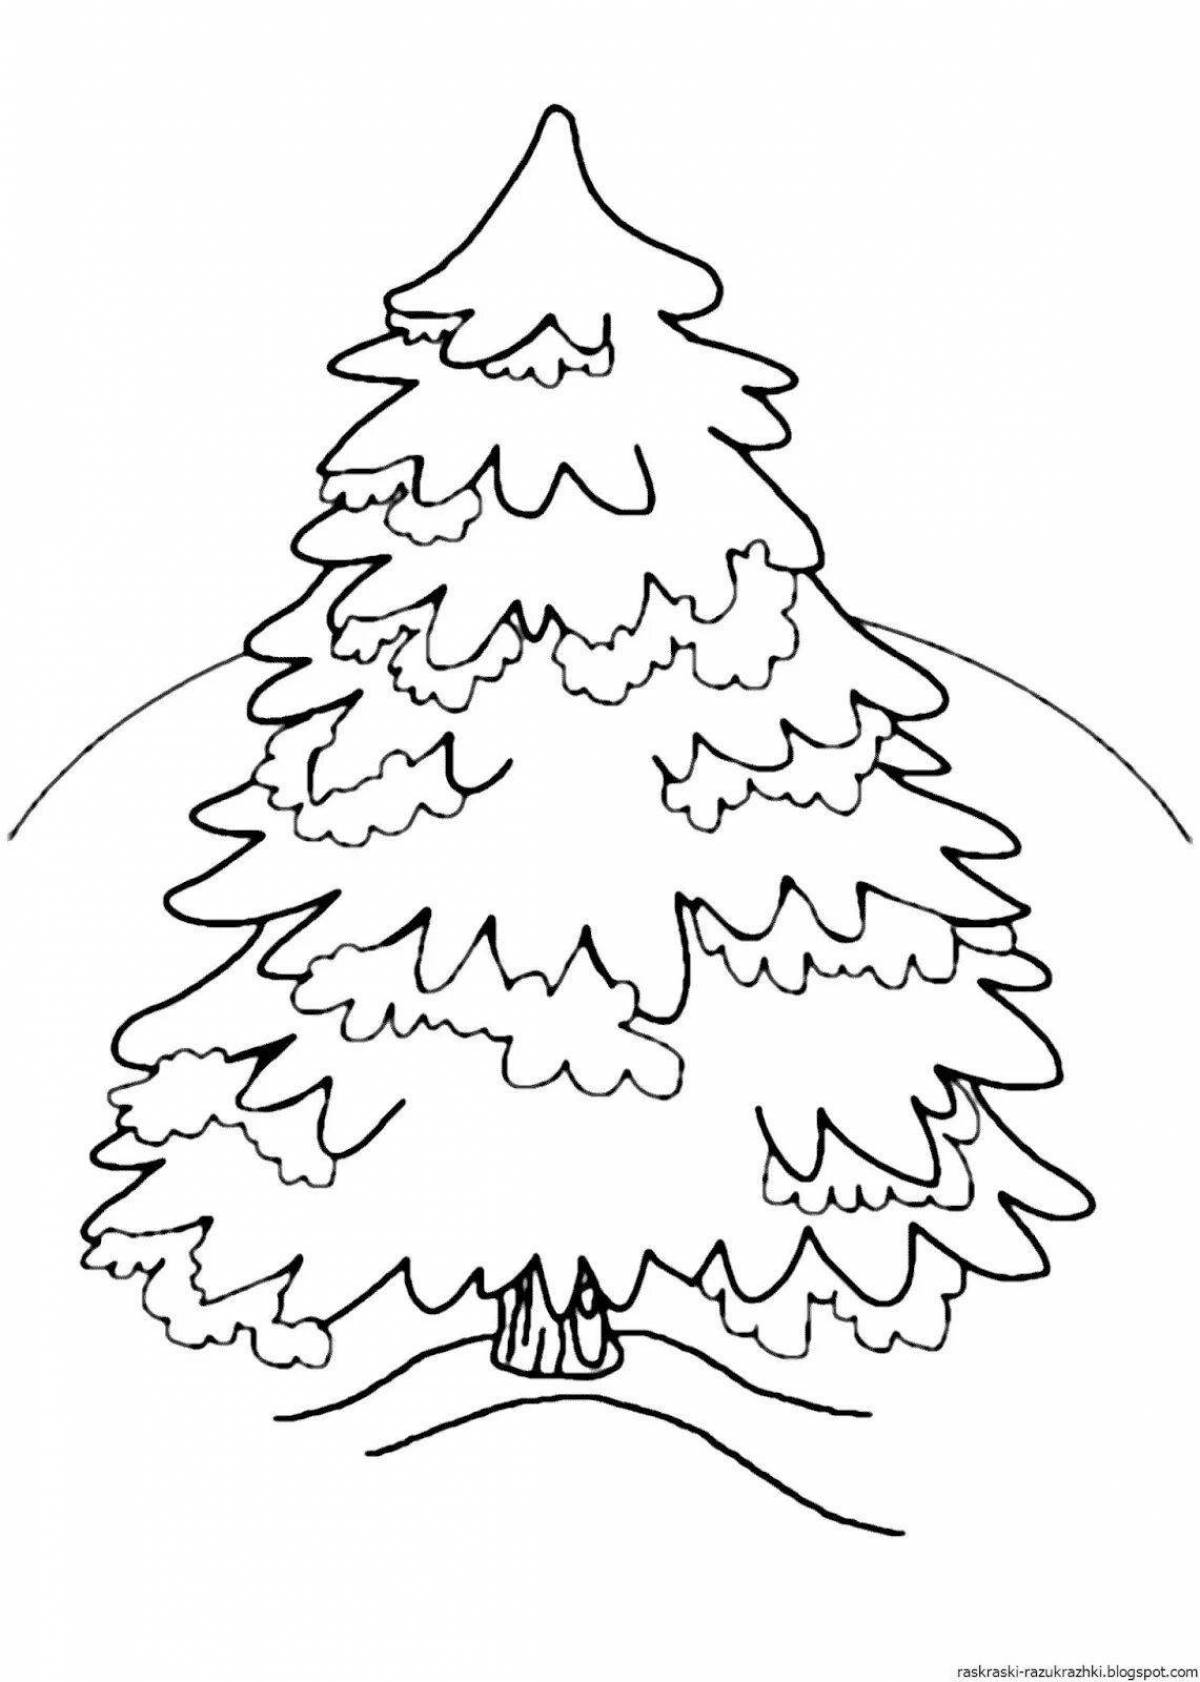 Coloring book exalted christmas tree in winter